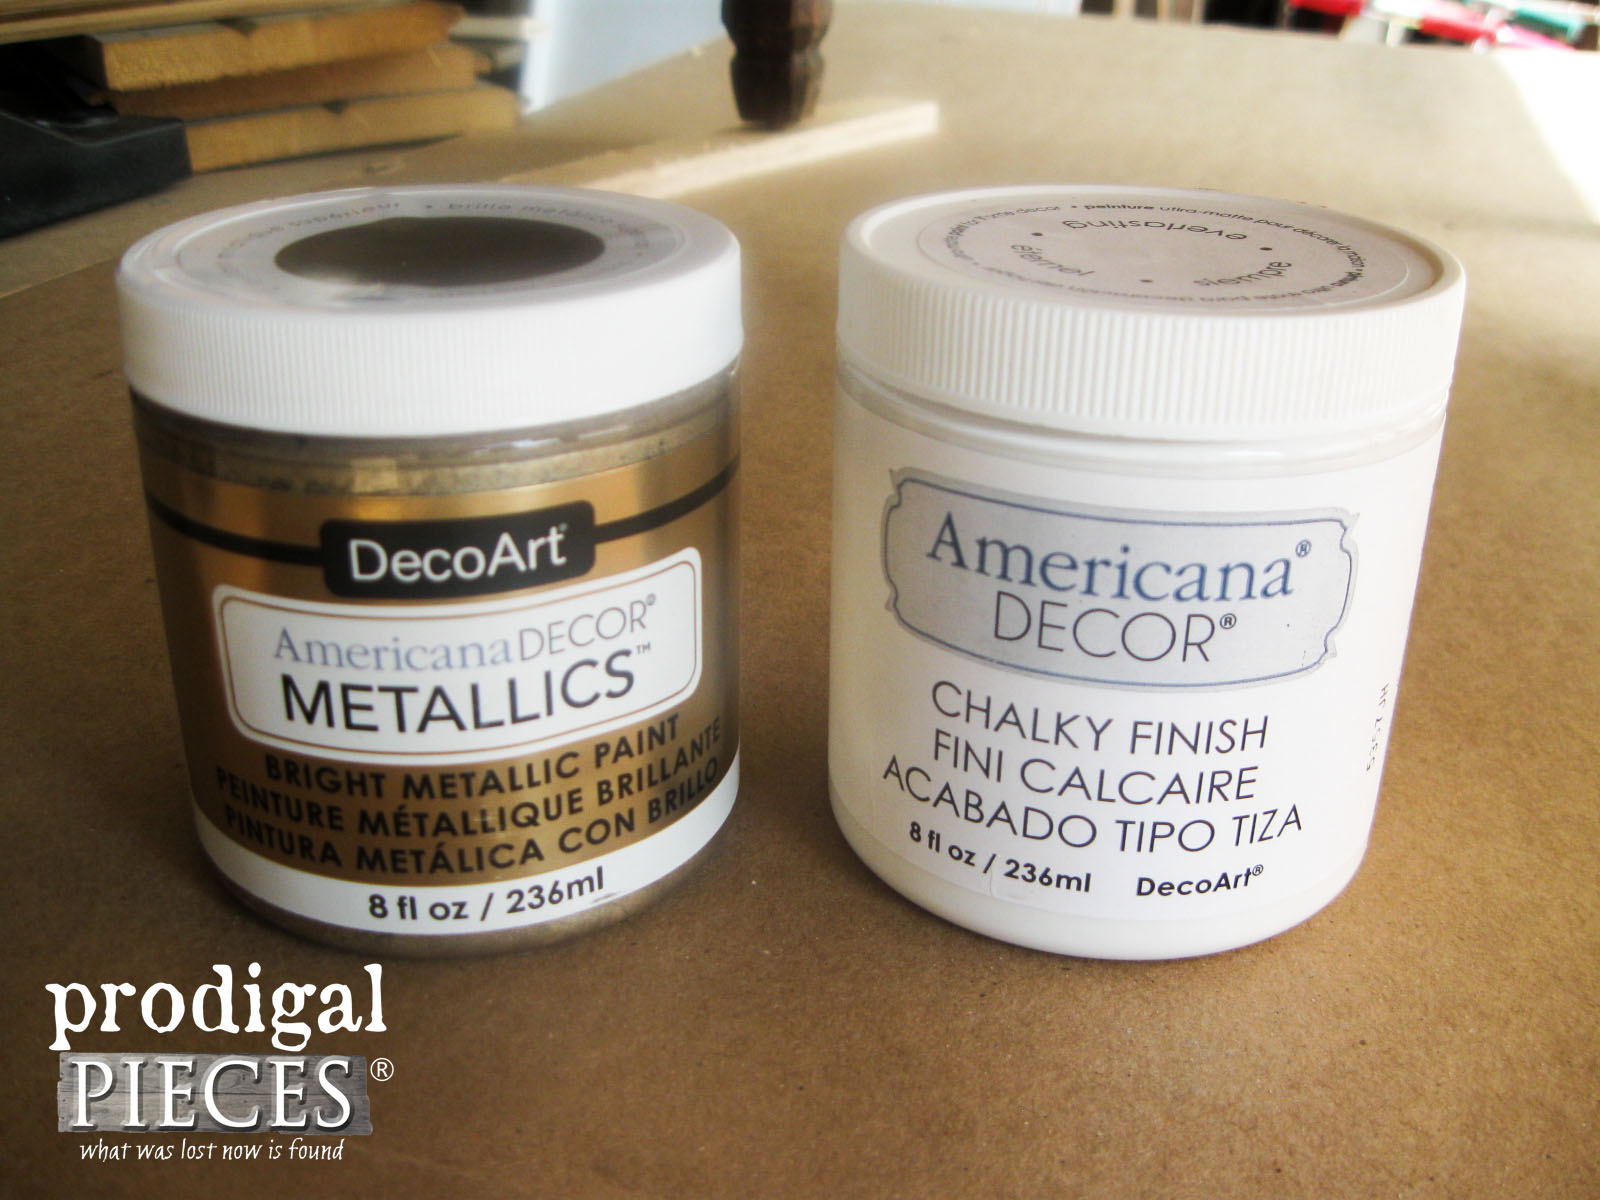 DecoArt Americana Metallic and Chalky Finish Paint for Makeover by Prodigal Pieces | www.prodigalpieces.com